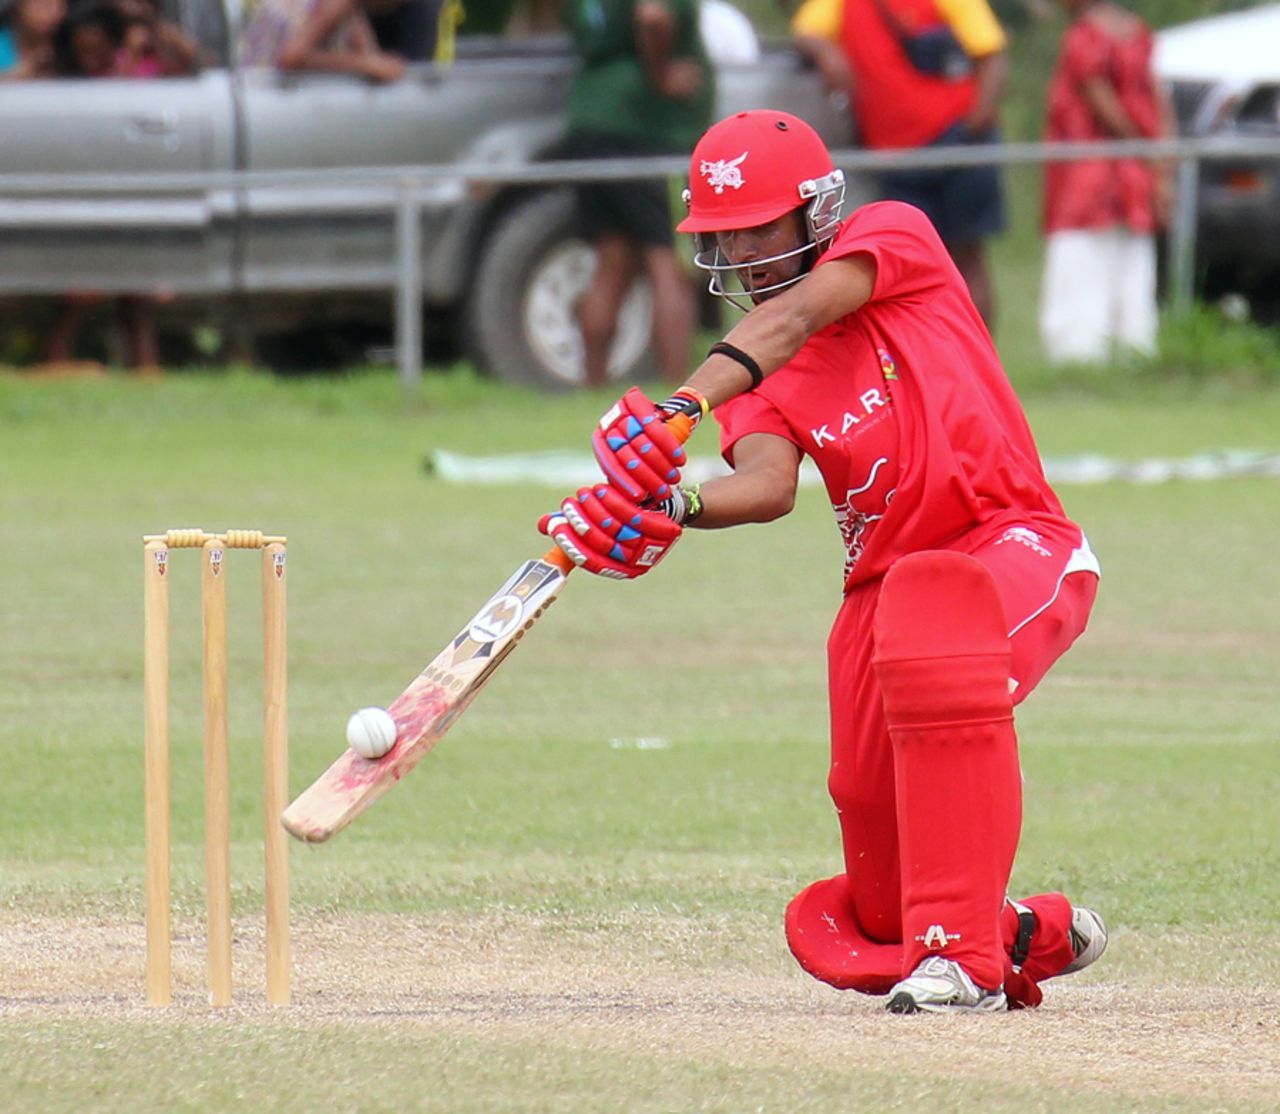 Waqas Barkat scored a quick-fire 39 against PNG in the Air Niugini Super Series 2012 T20 at the Colts Ground, Port Moresby, on 21st July 2012